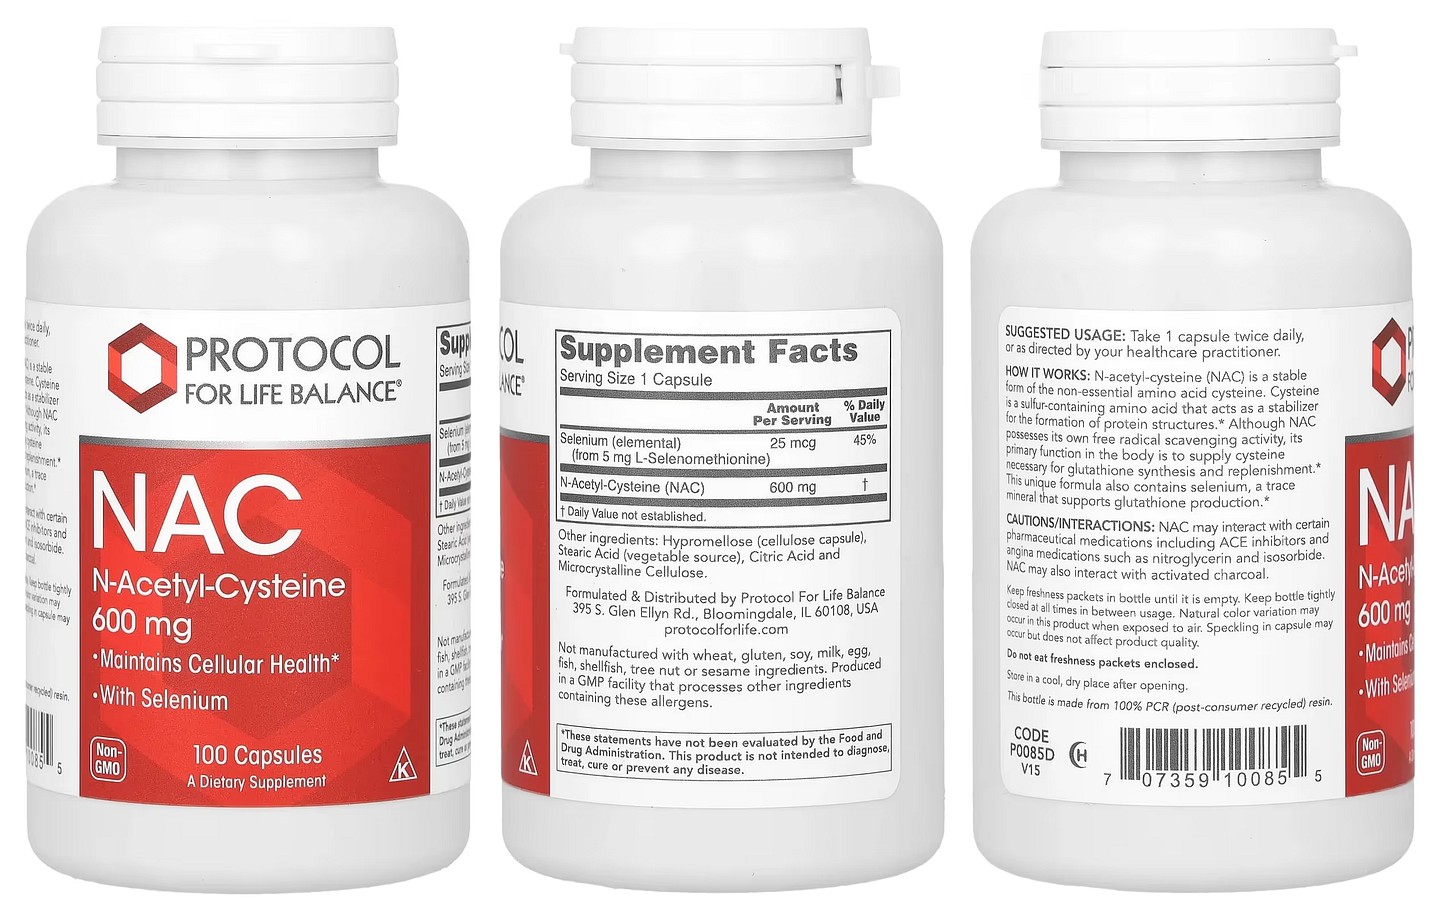 Protocol for Life Balance, NAC (N-Acetyl-Cysteine) packaging